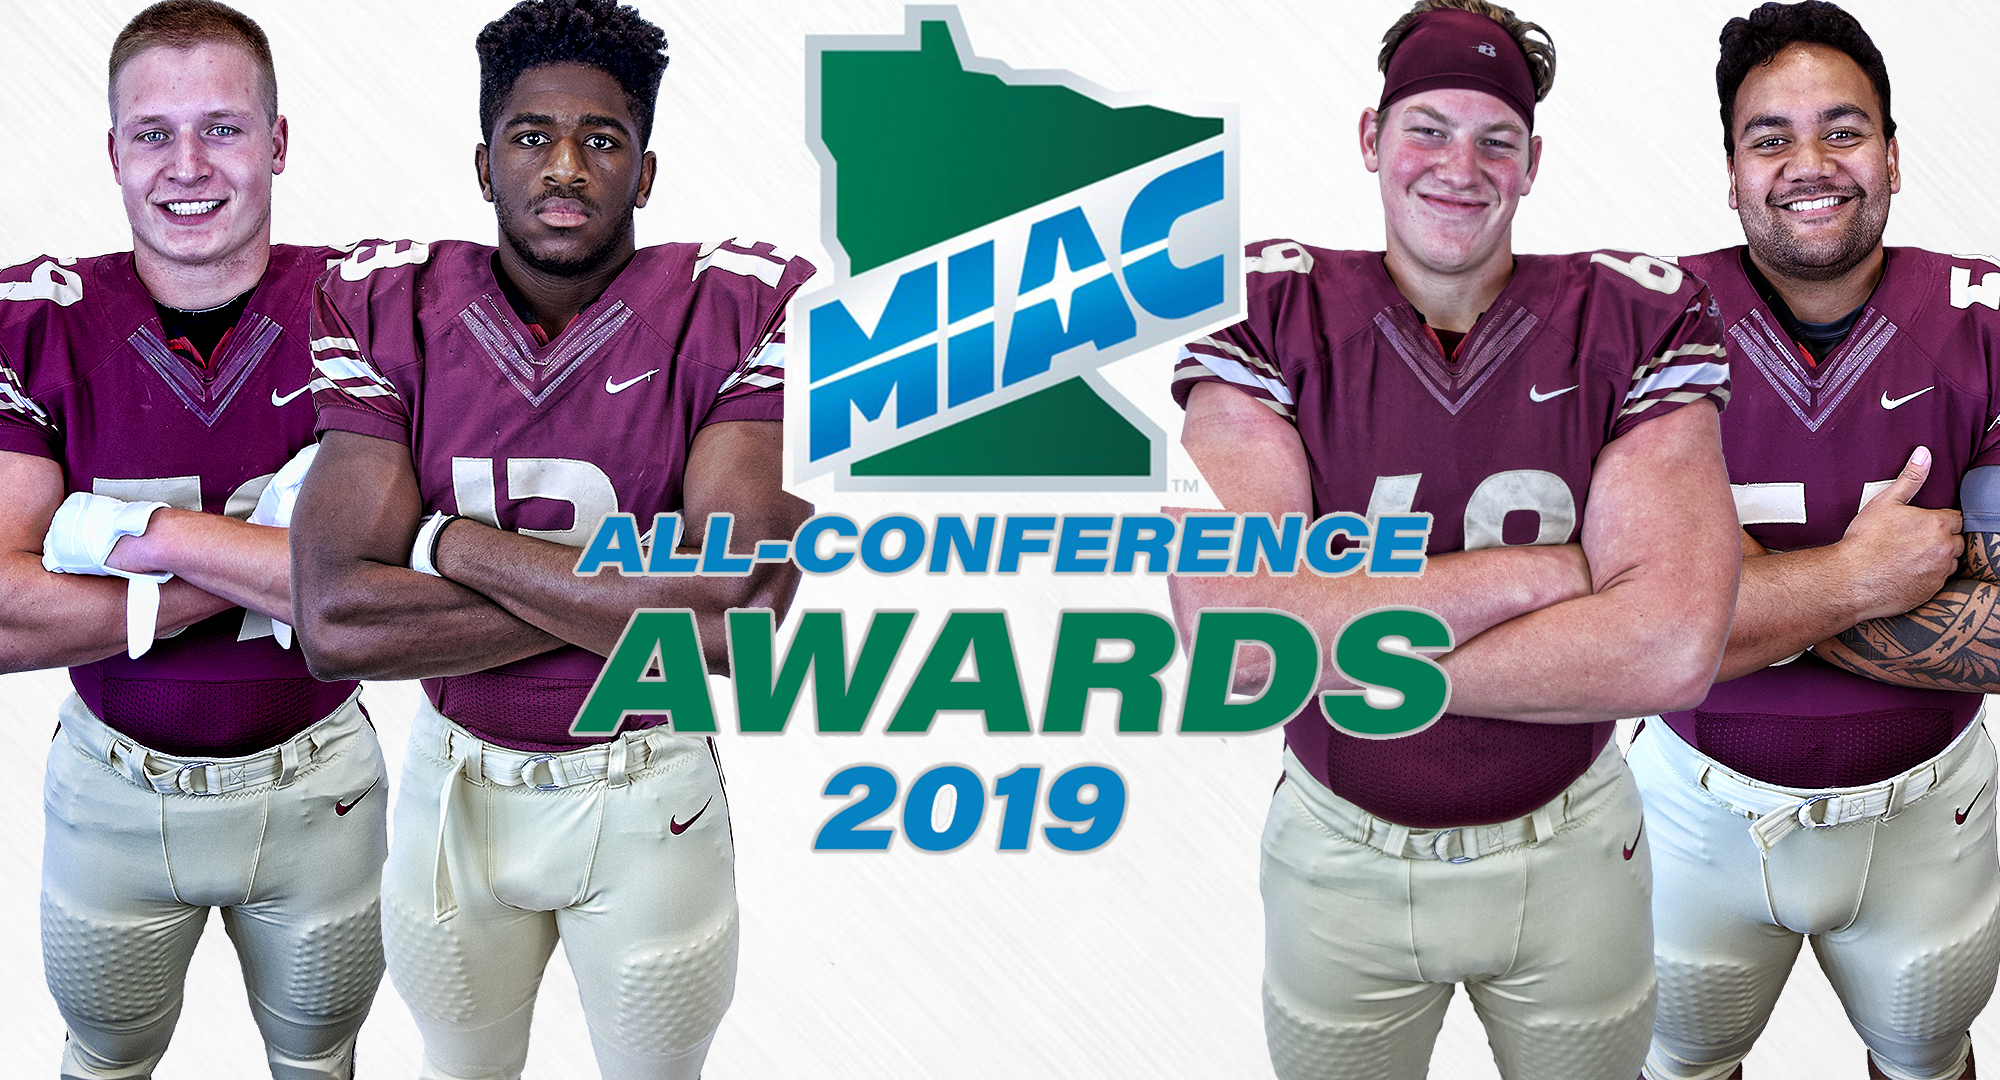 Alex Berg, Willie Julkes, Hans Solberg and Mykal Tuiolosega-Siufanua were all named to the MIAC All-Conference First Team.